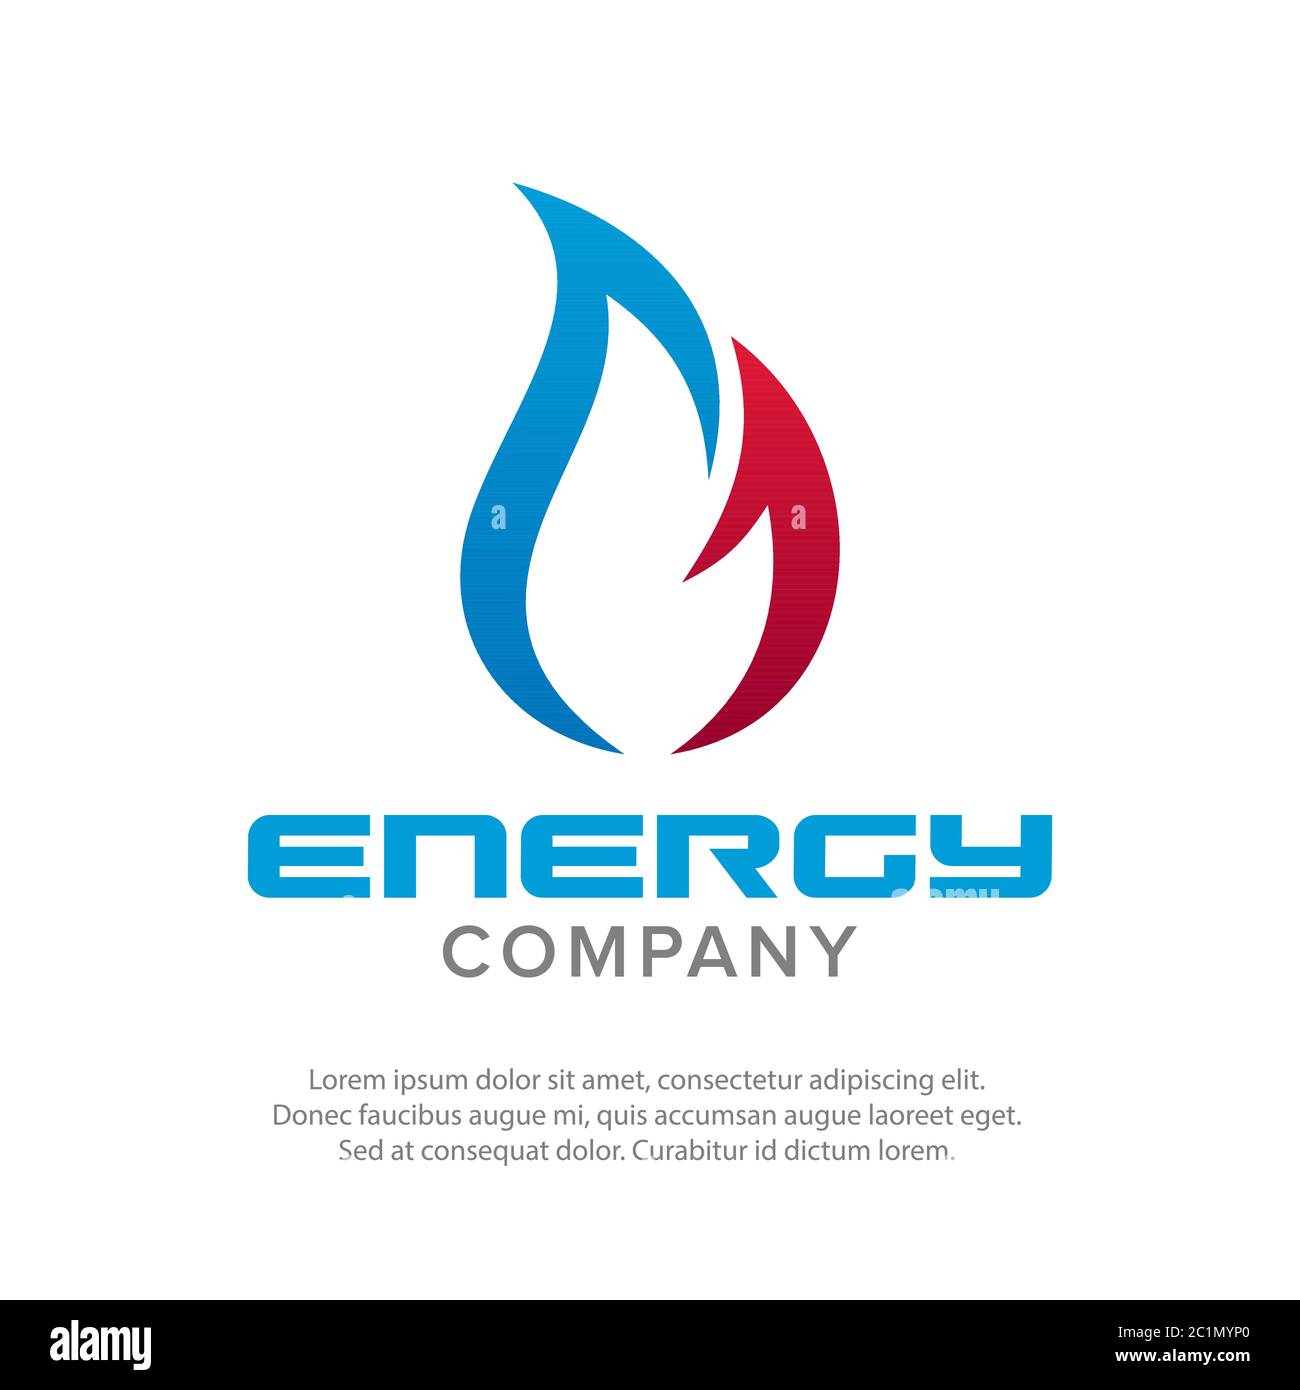 Vector illustration of a flame logo. Suitable for the logo and branding of an oil and gas company that produces energy for life. Stock Vector